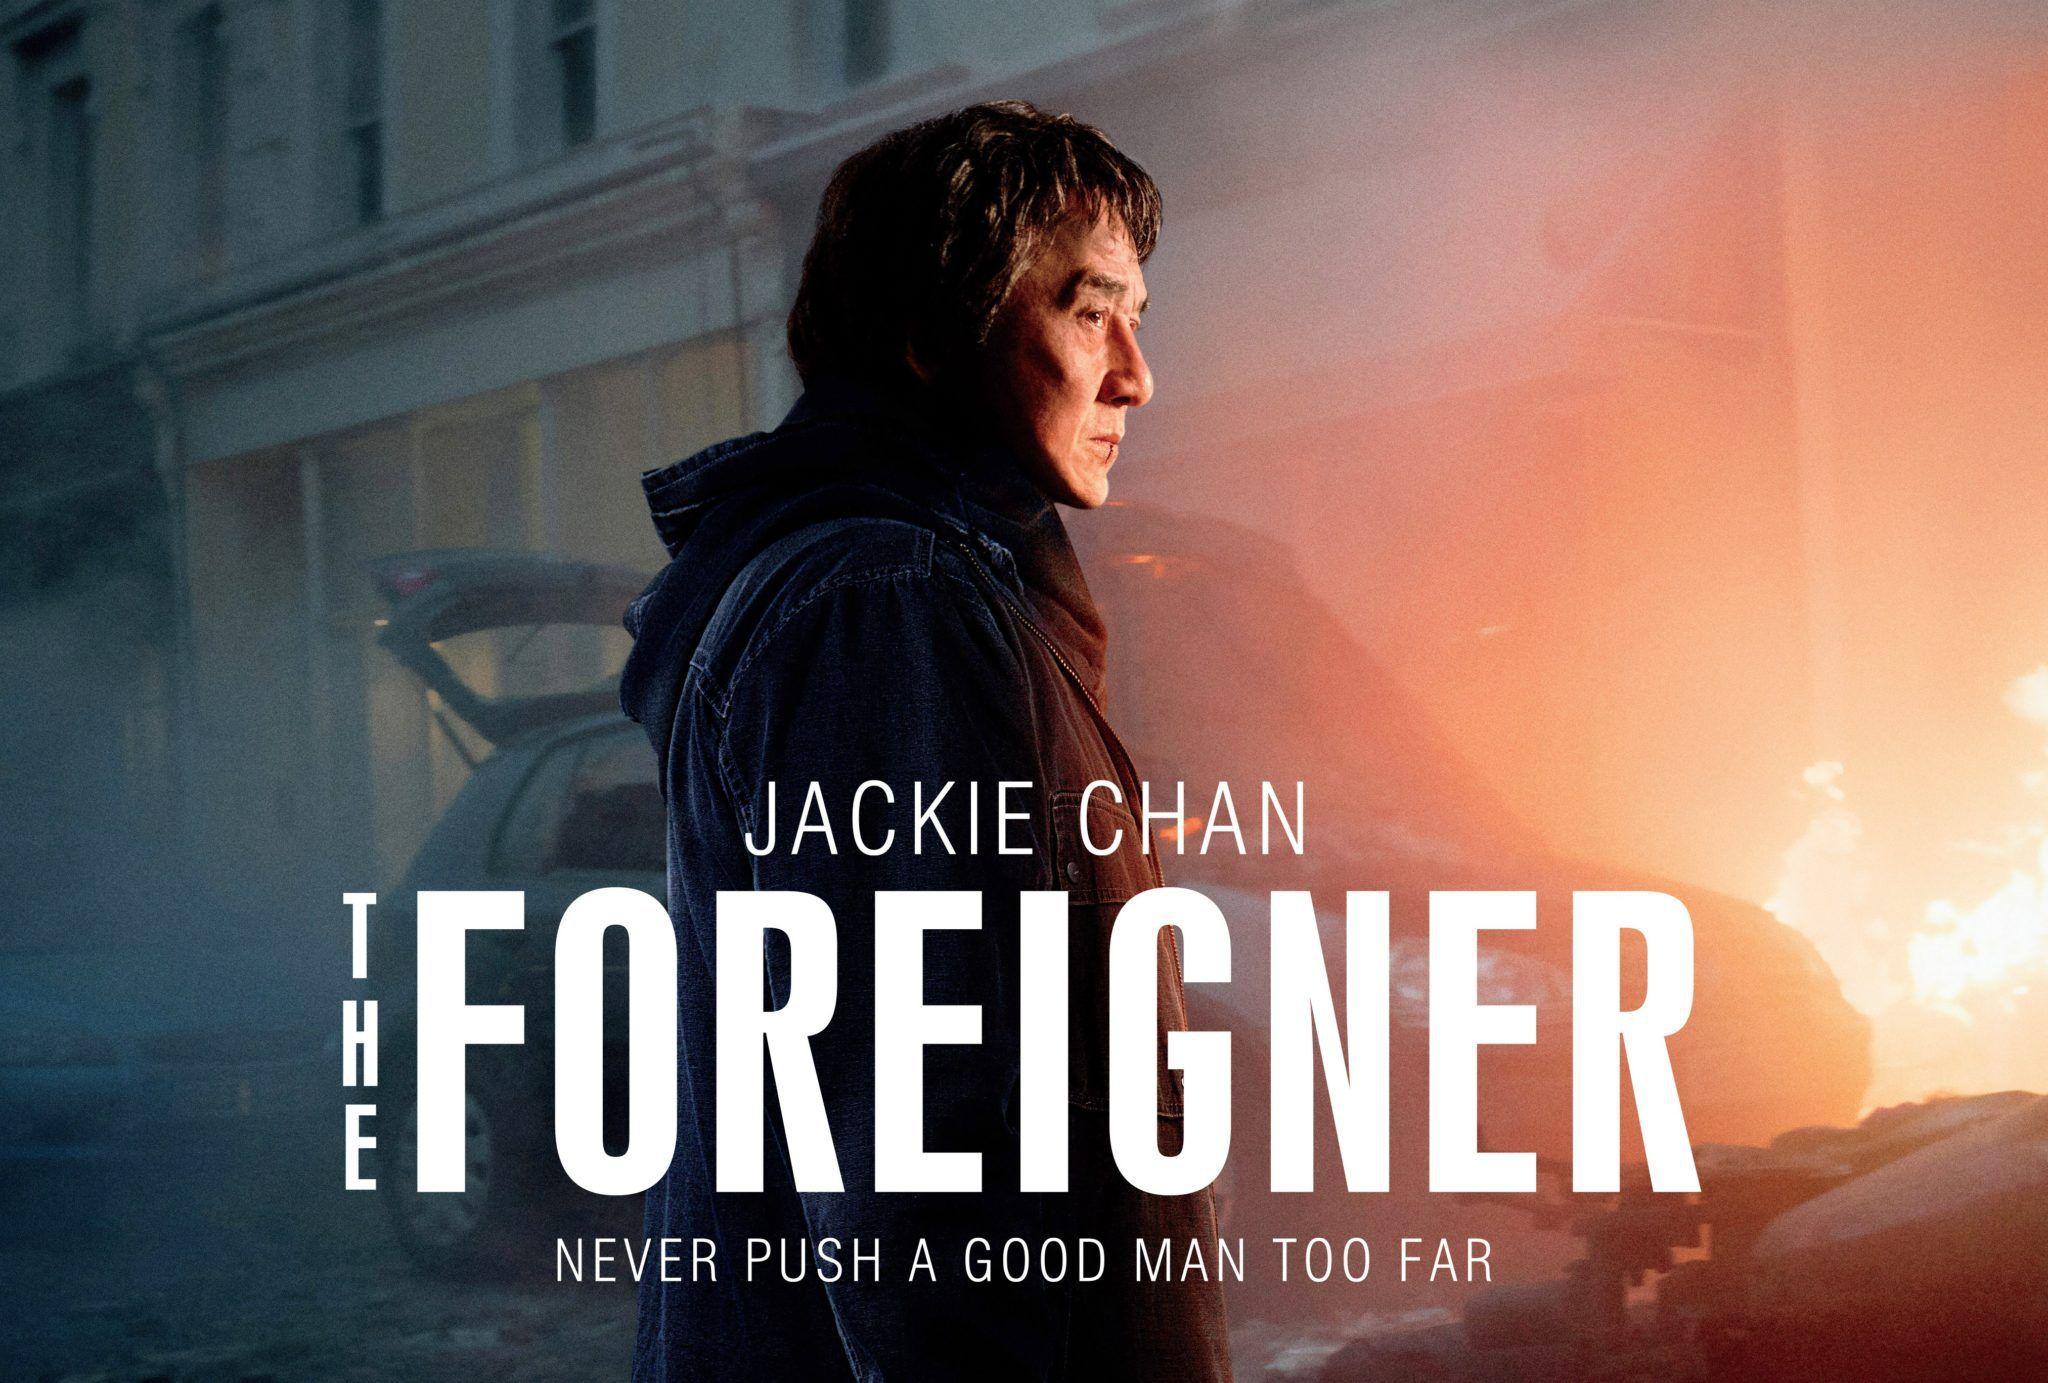 Jackie Chan The Foreigner Poster 4K Wallpaper for PC, Android